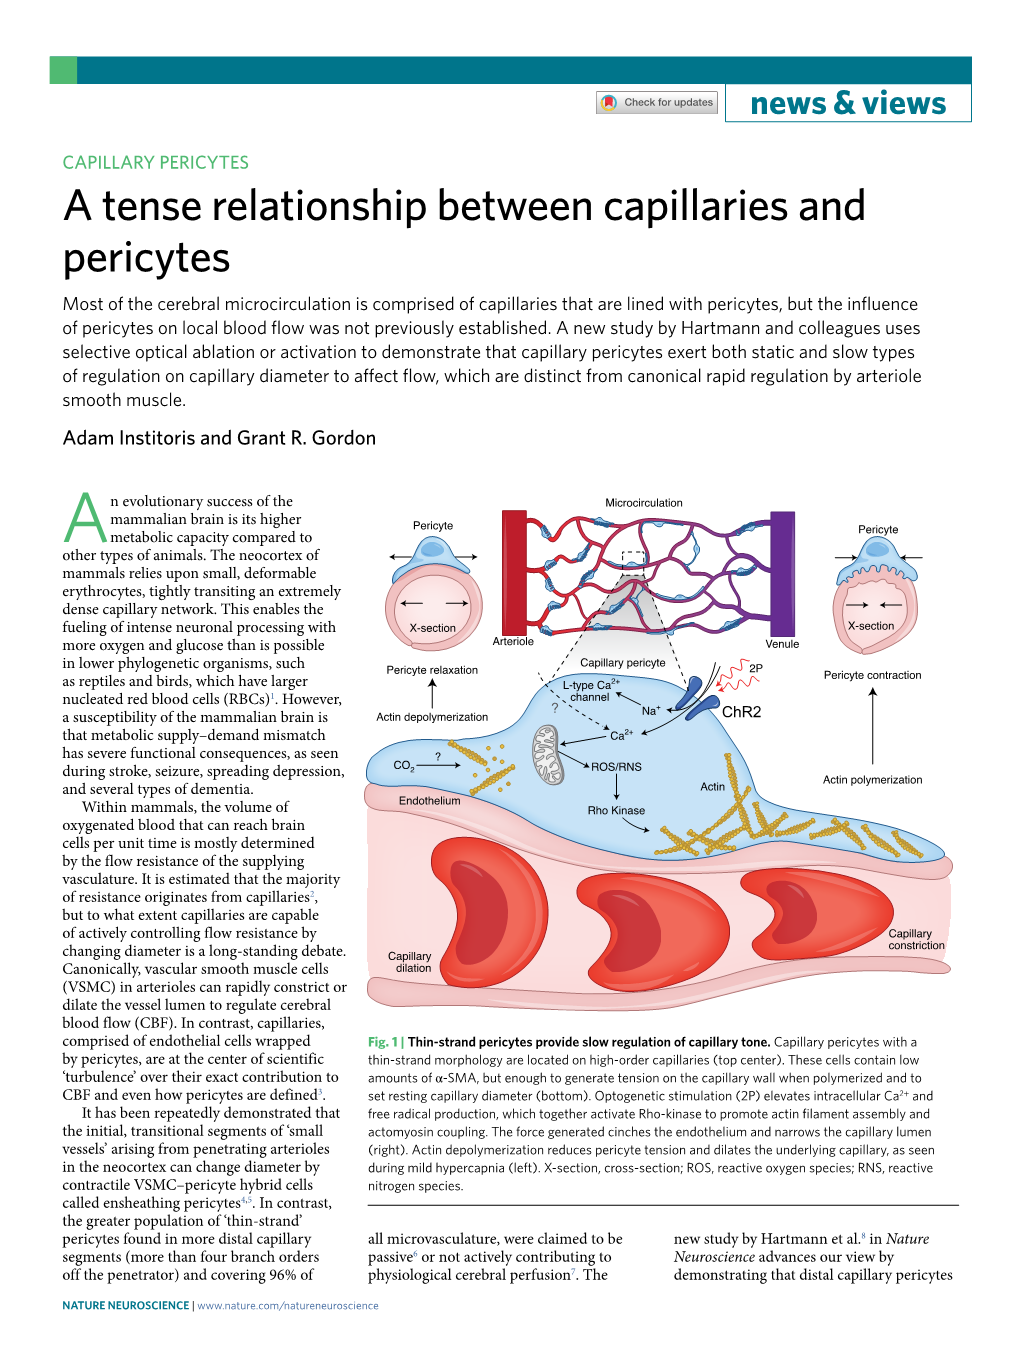 A Tense Relationship Between Capillaries and Pericytes